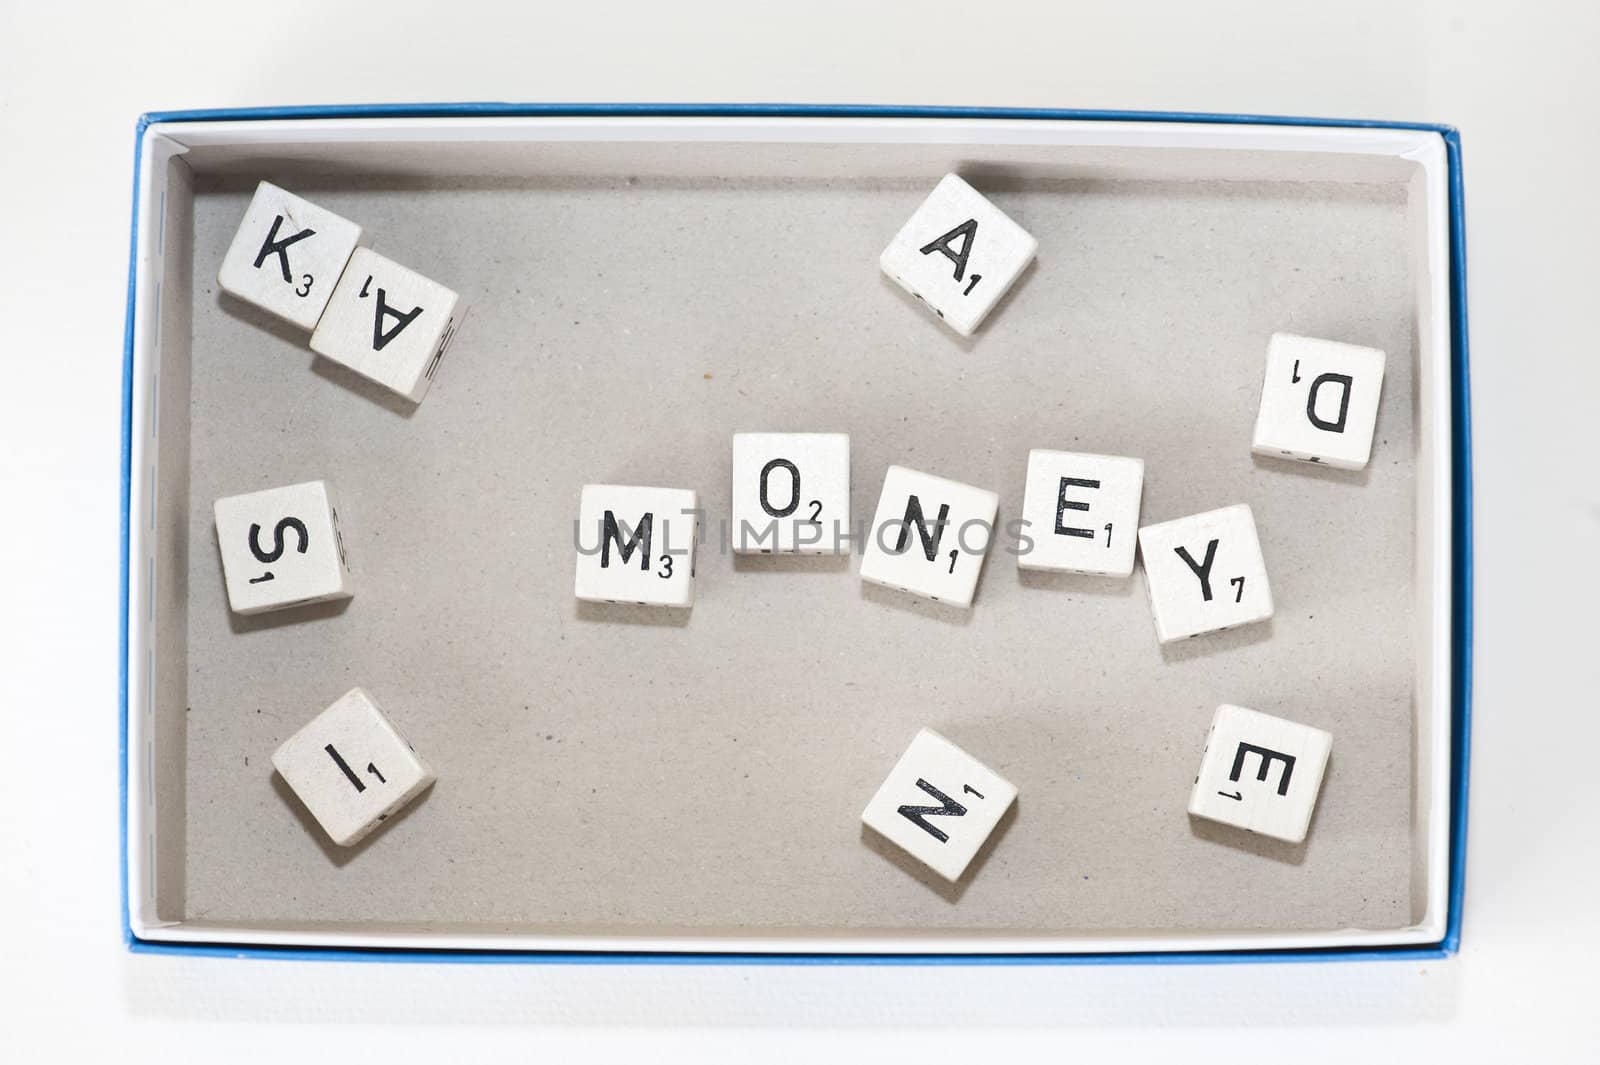 "money" spelled in game dice by rongreer